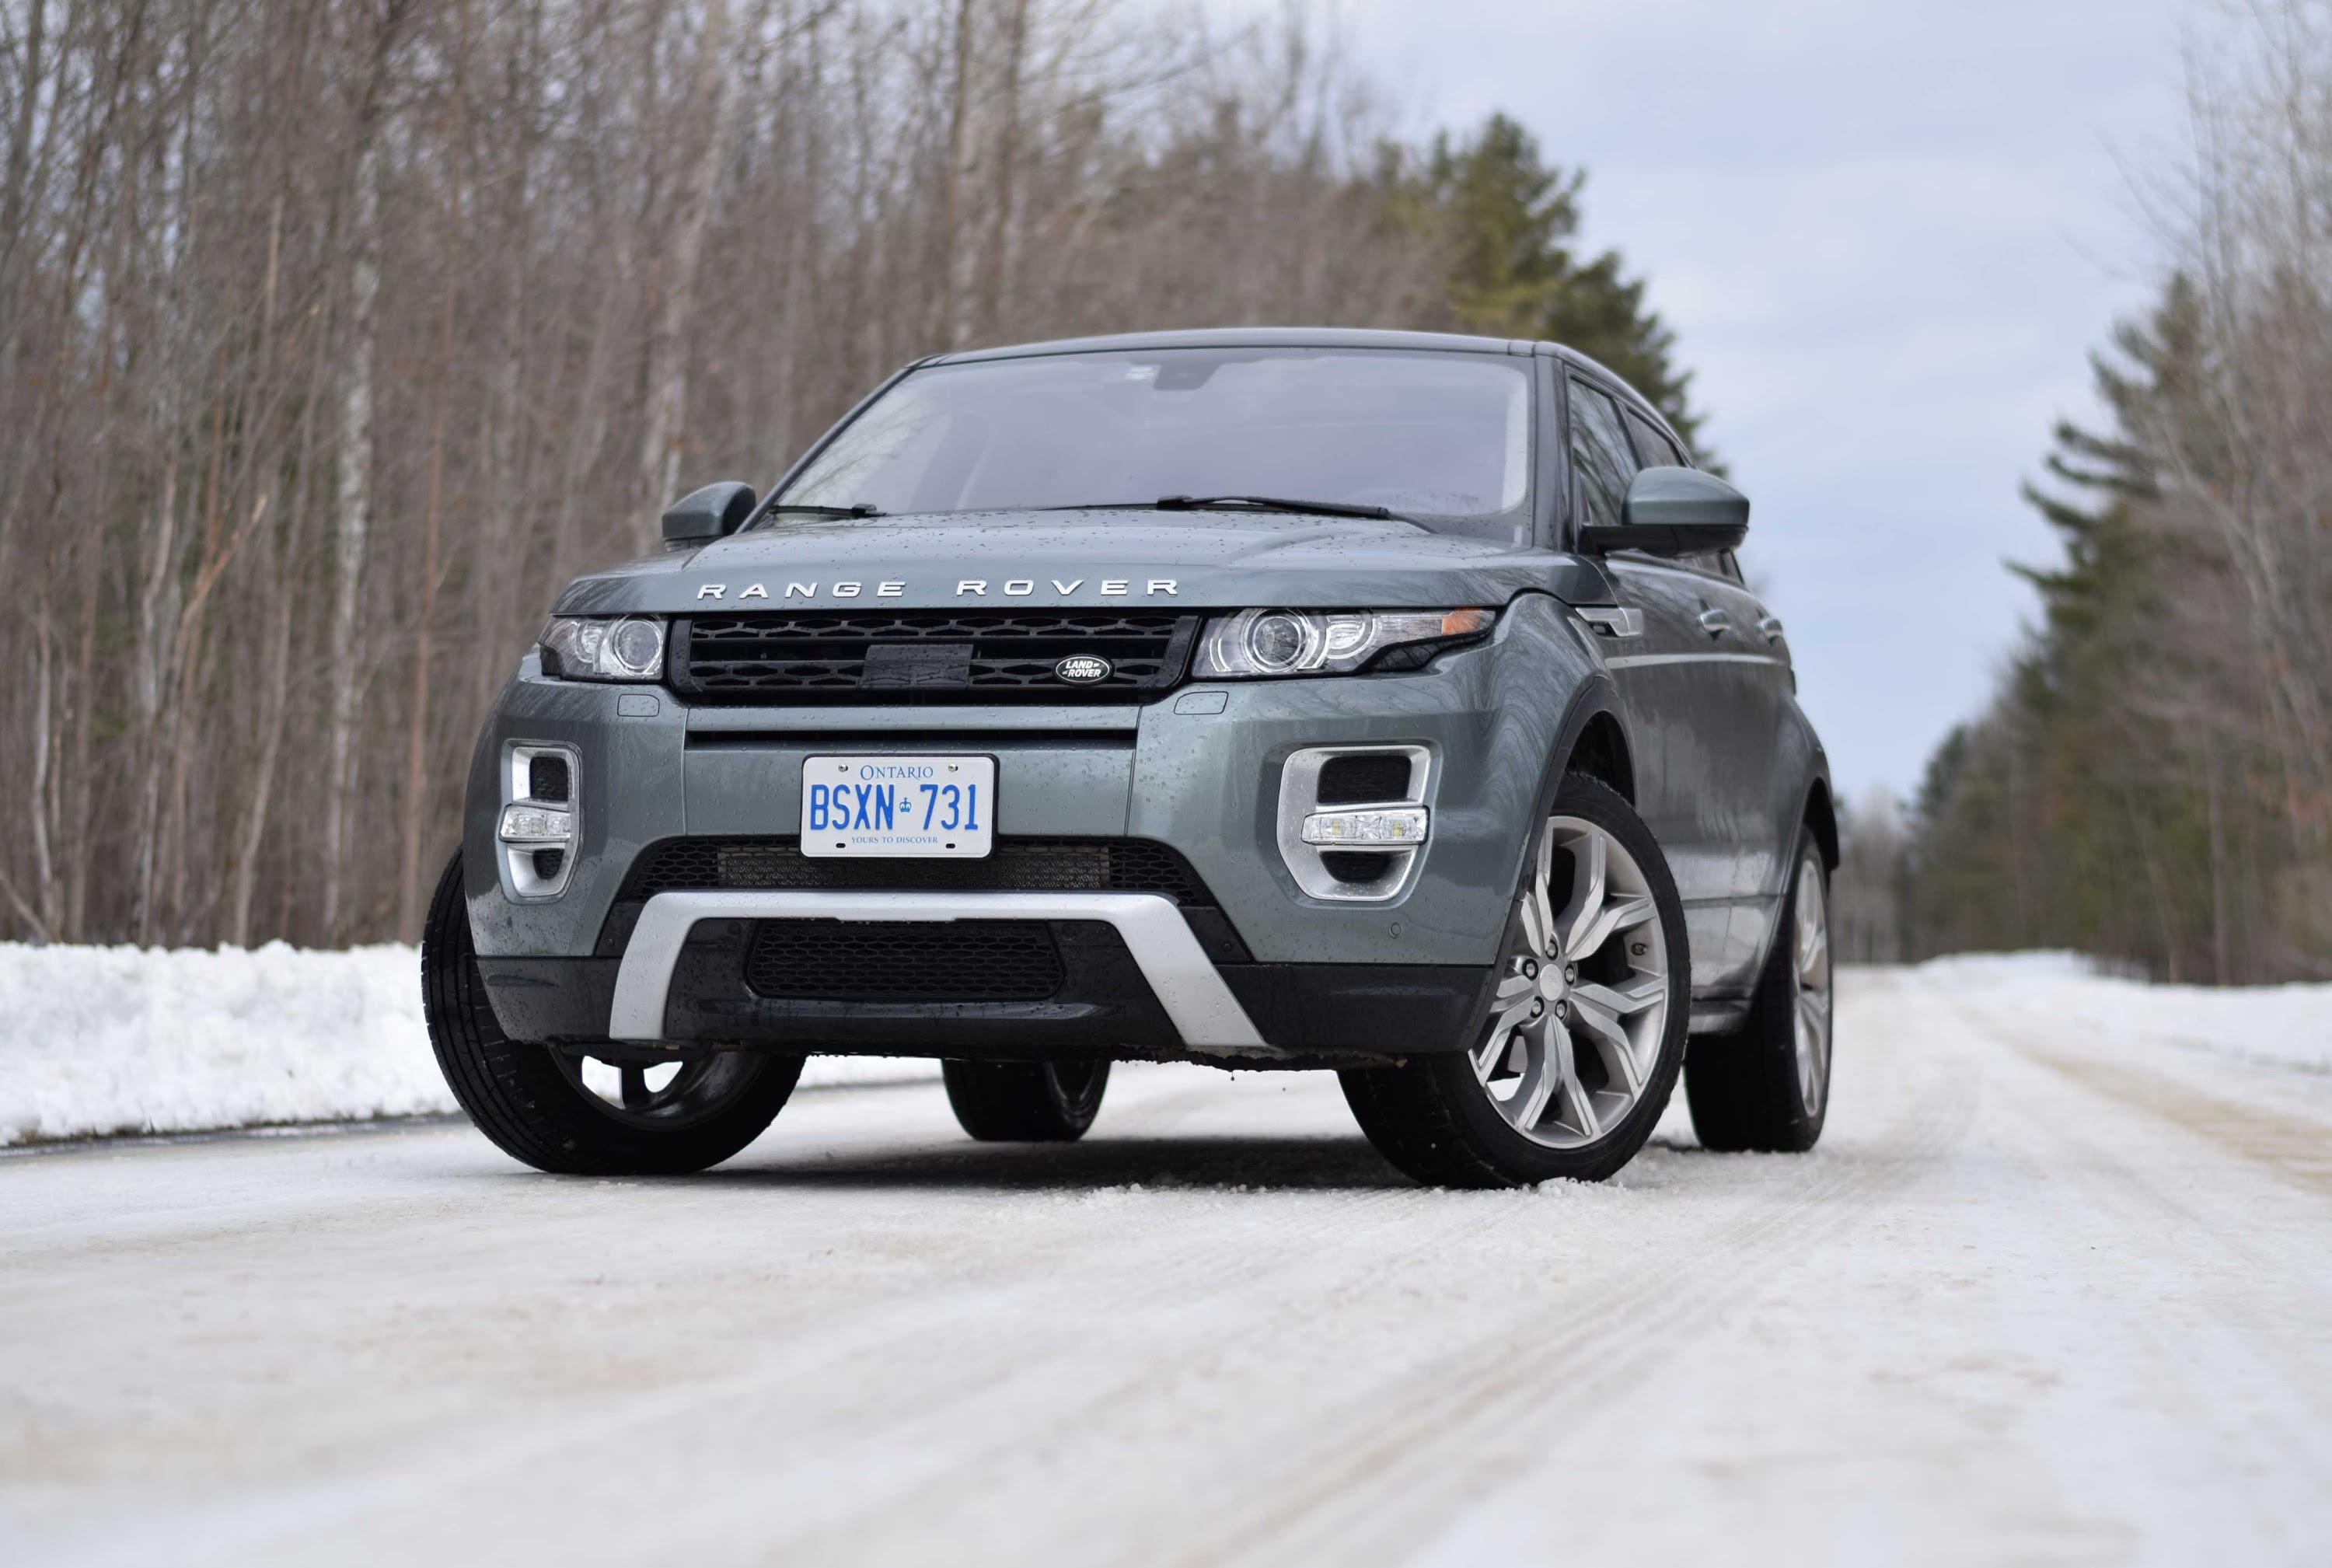 2015 Range Rover Evoque Autobiography Backgrounds on Wallpapers Vista